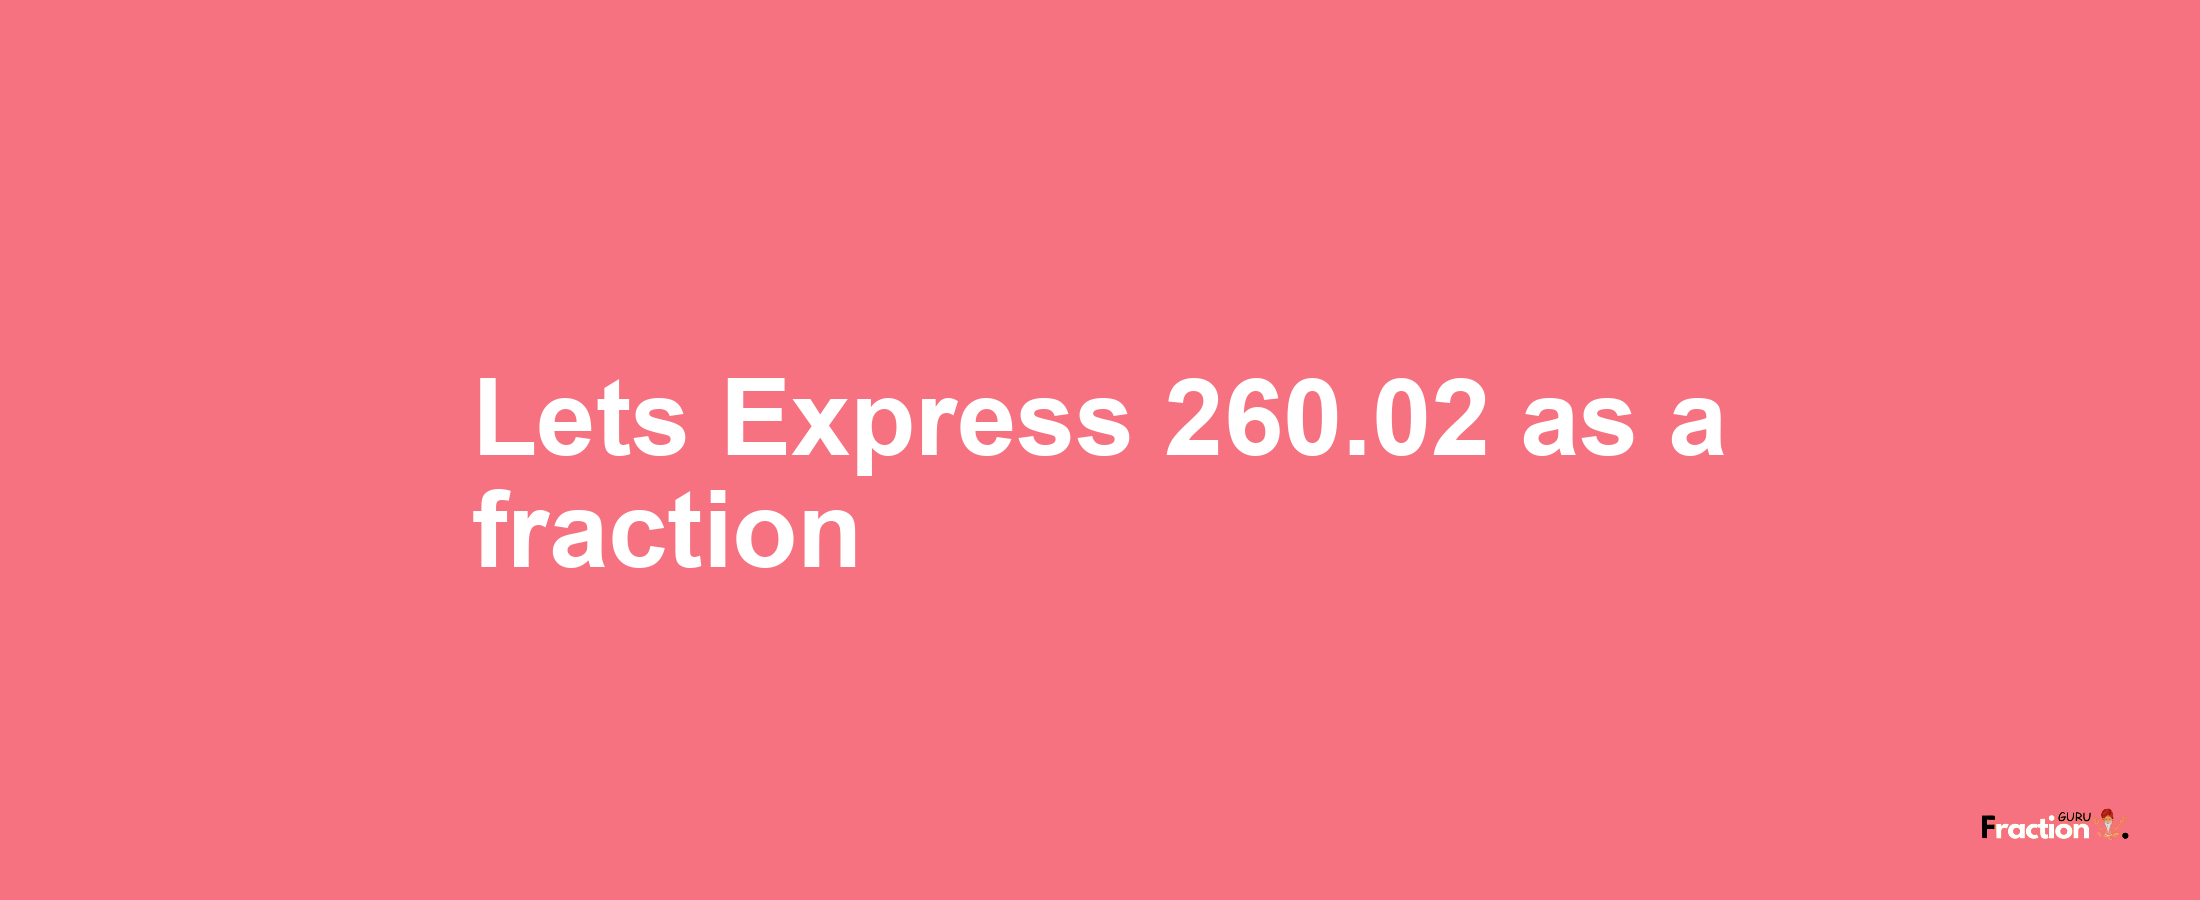 Lets Express 260.02 as afraction